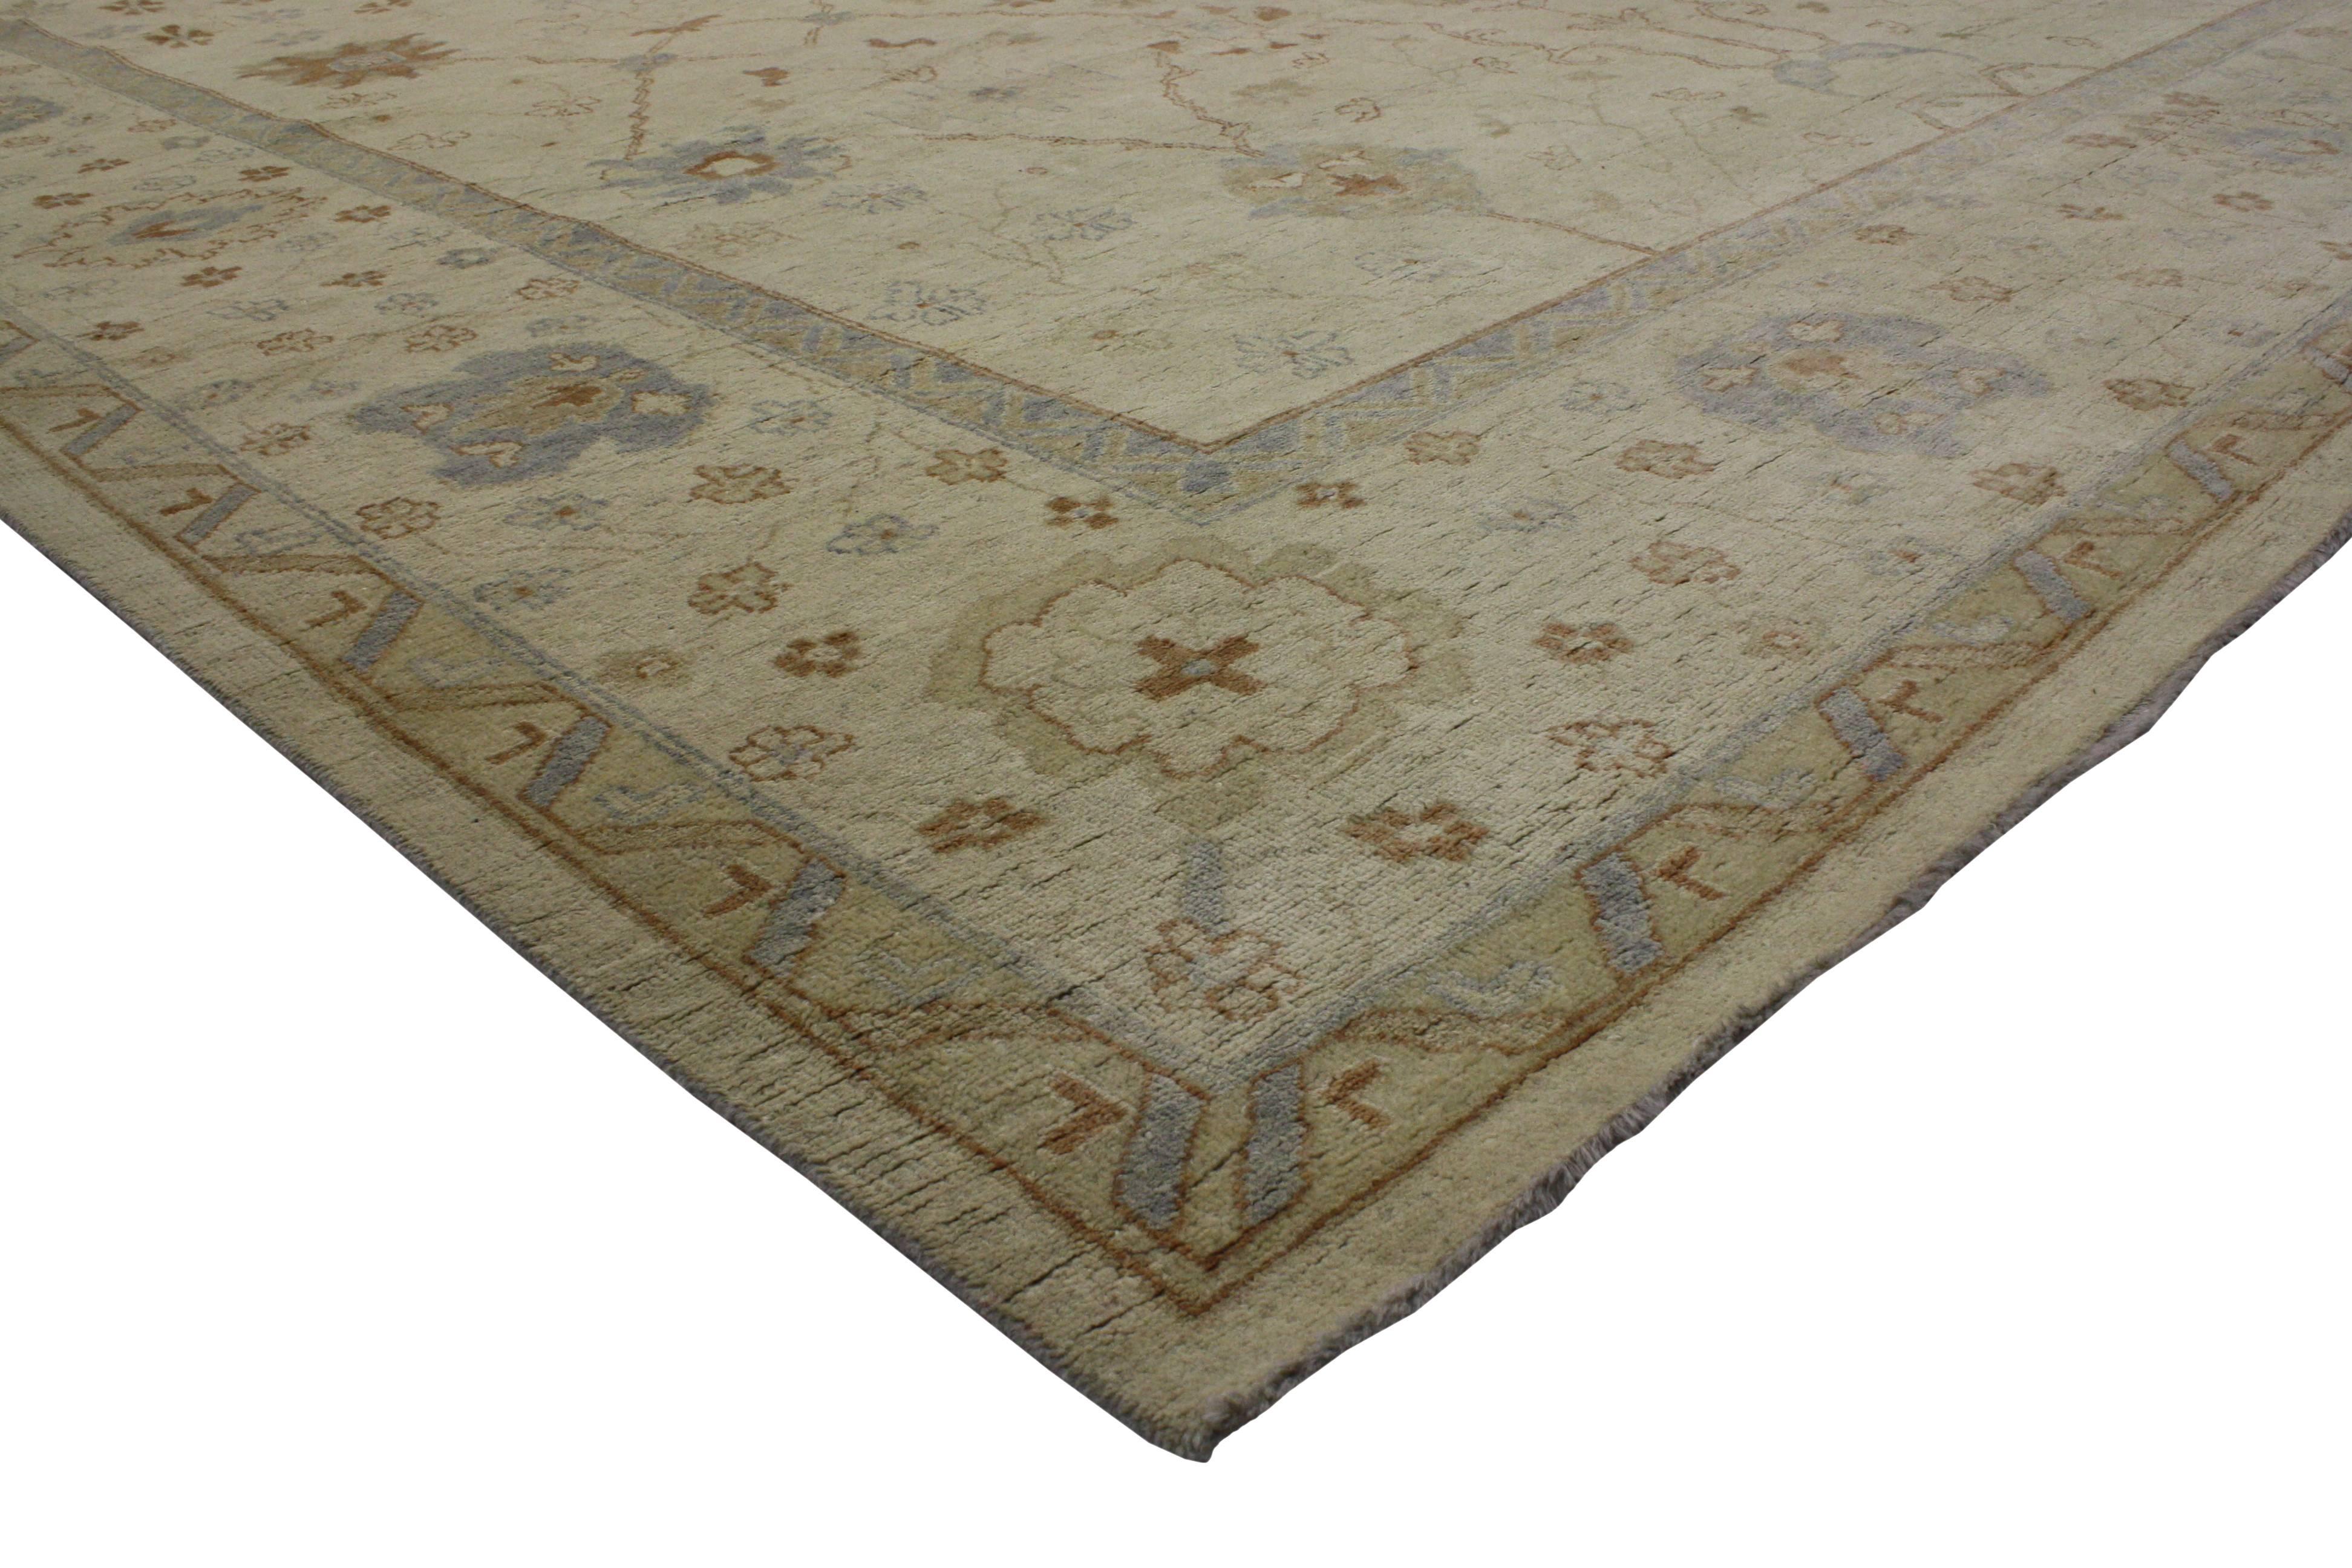 30195 New Contemporary Oushak Area Rug with Coastal Cottage Style 12'00 x 15'06. Blending Coastal Cottage style and elements from the modern world, this hand knotted wool contemporary Oushak rug beautifully balances new and old. It features an all